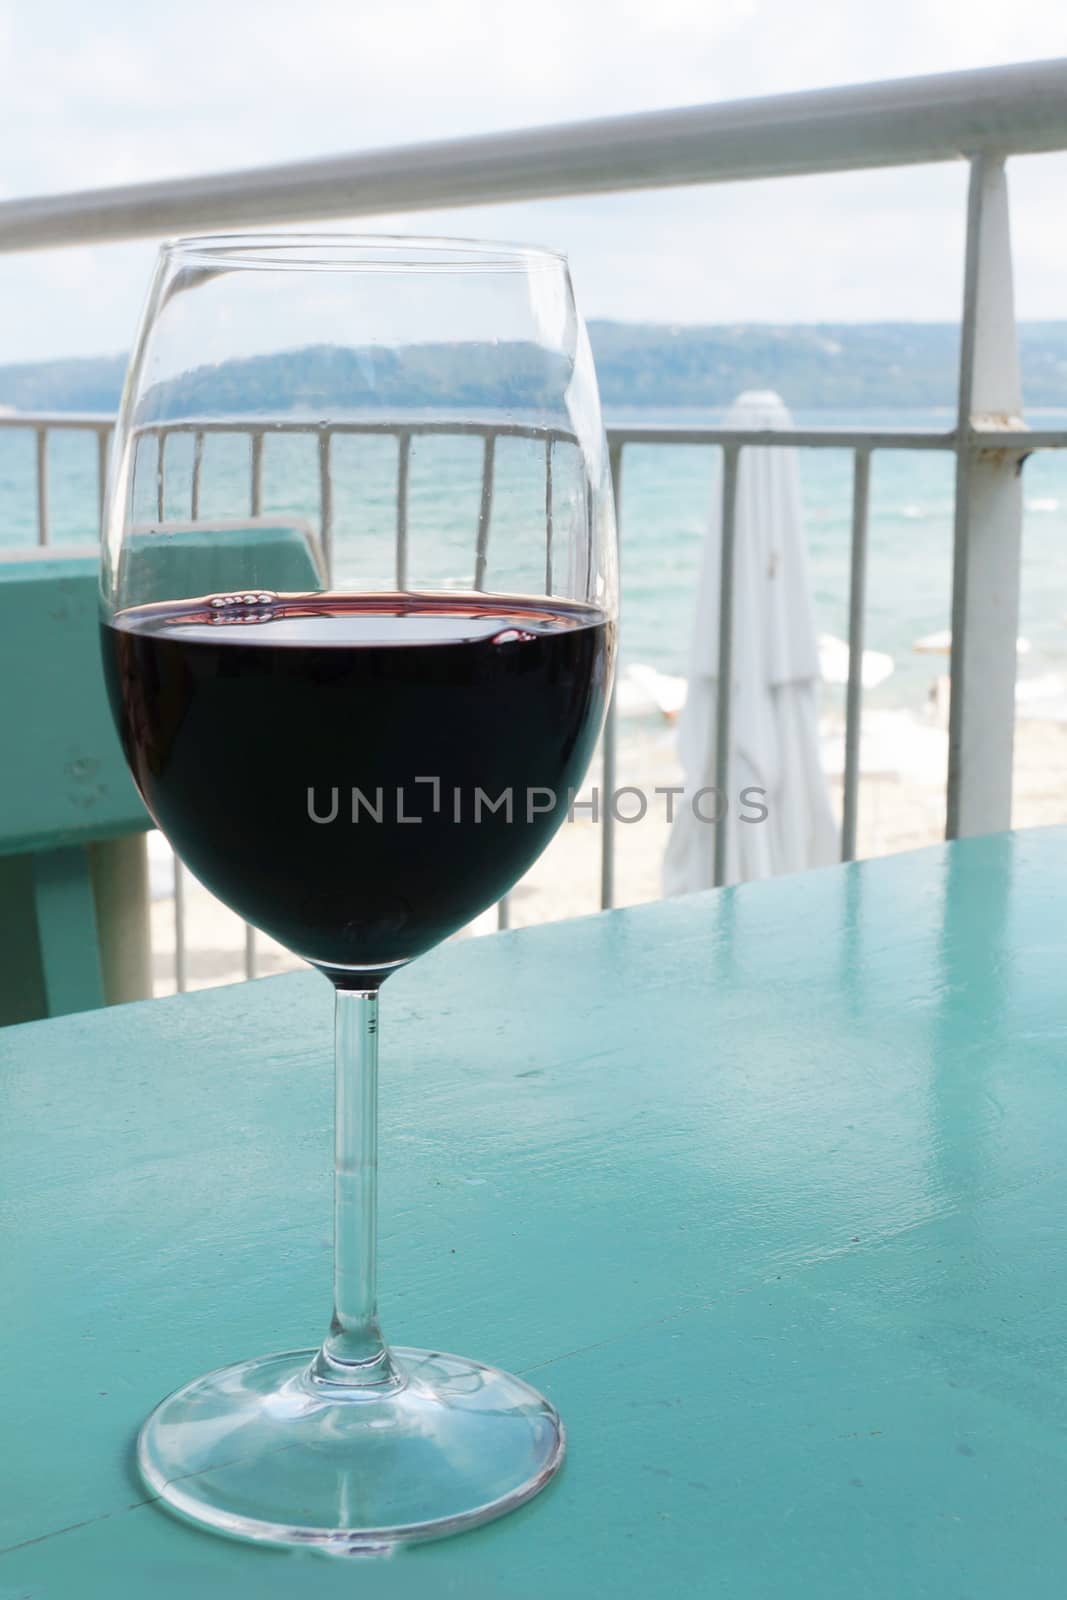 a glass of wine on a cafe table against the background of the sea.